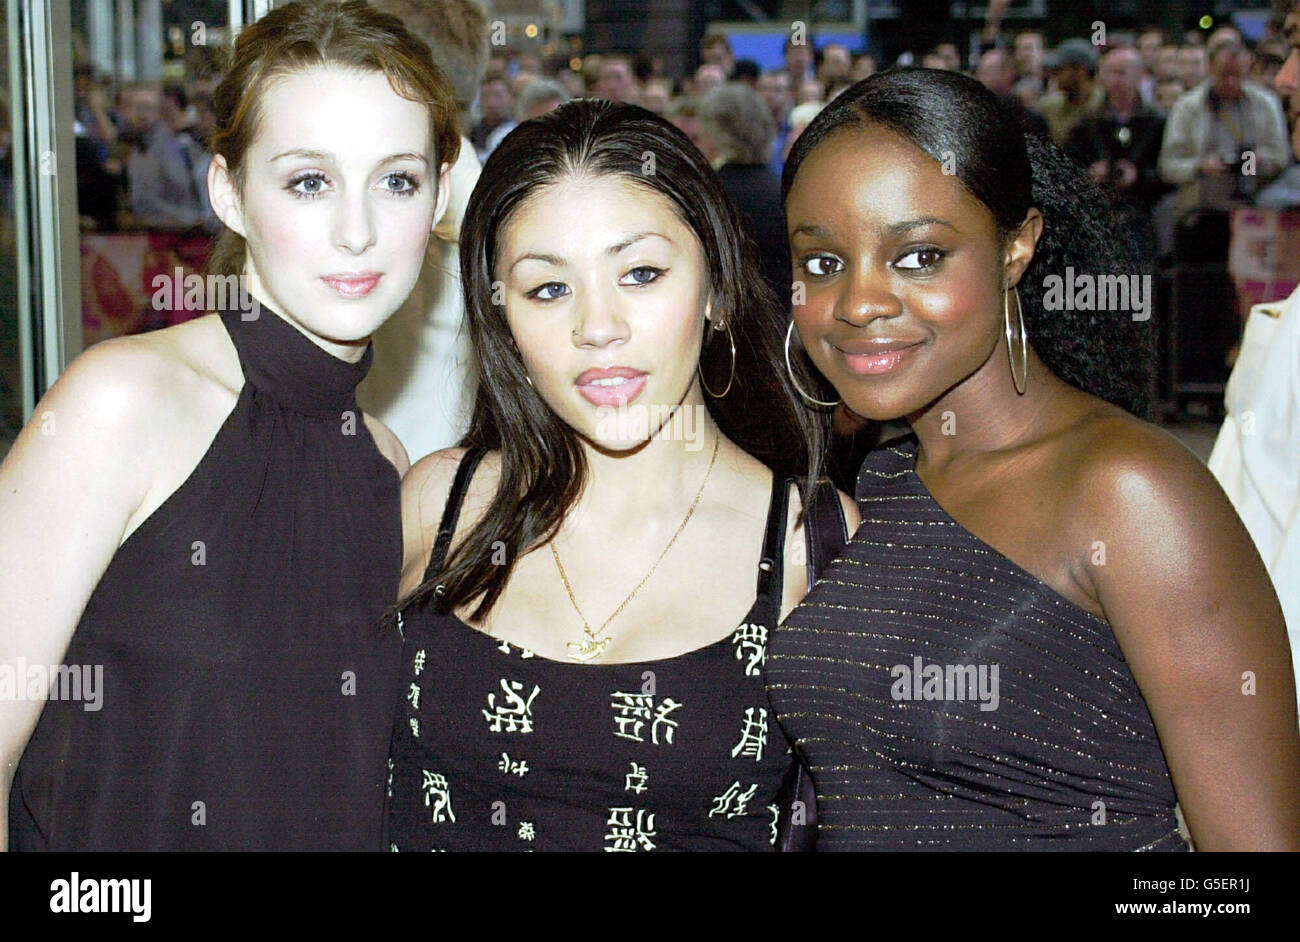 (L-R) Singers Siobhan Donaghy, Mutya Buena and Keisha Buchanan from the girl band Sugababes arrive for the premiere of the film High Heels and Low Lifes in London's West End. Stock Photo